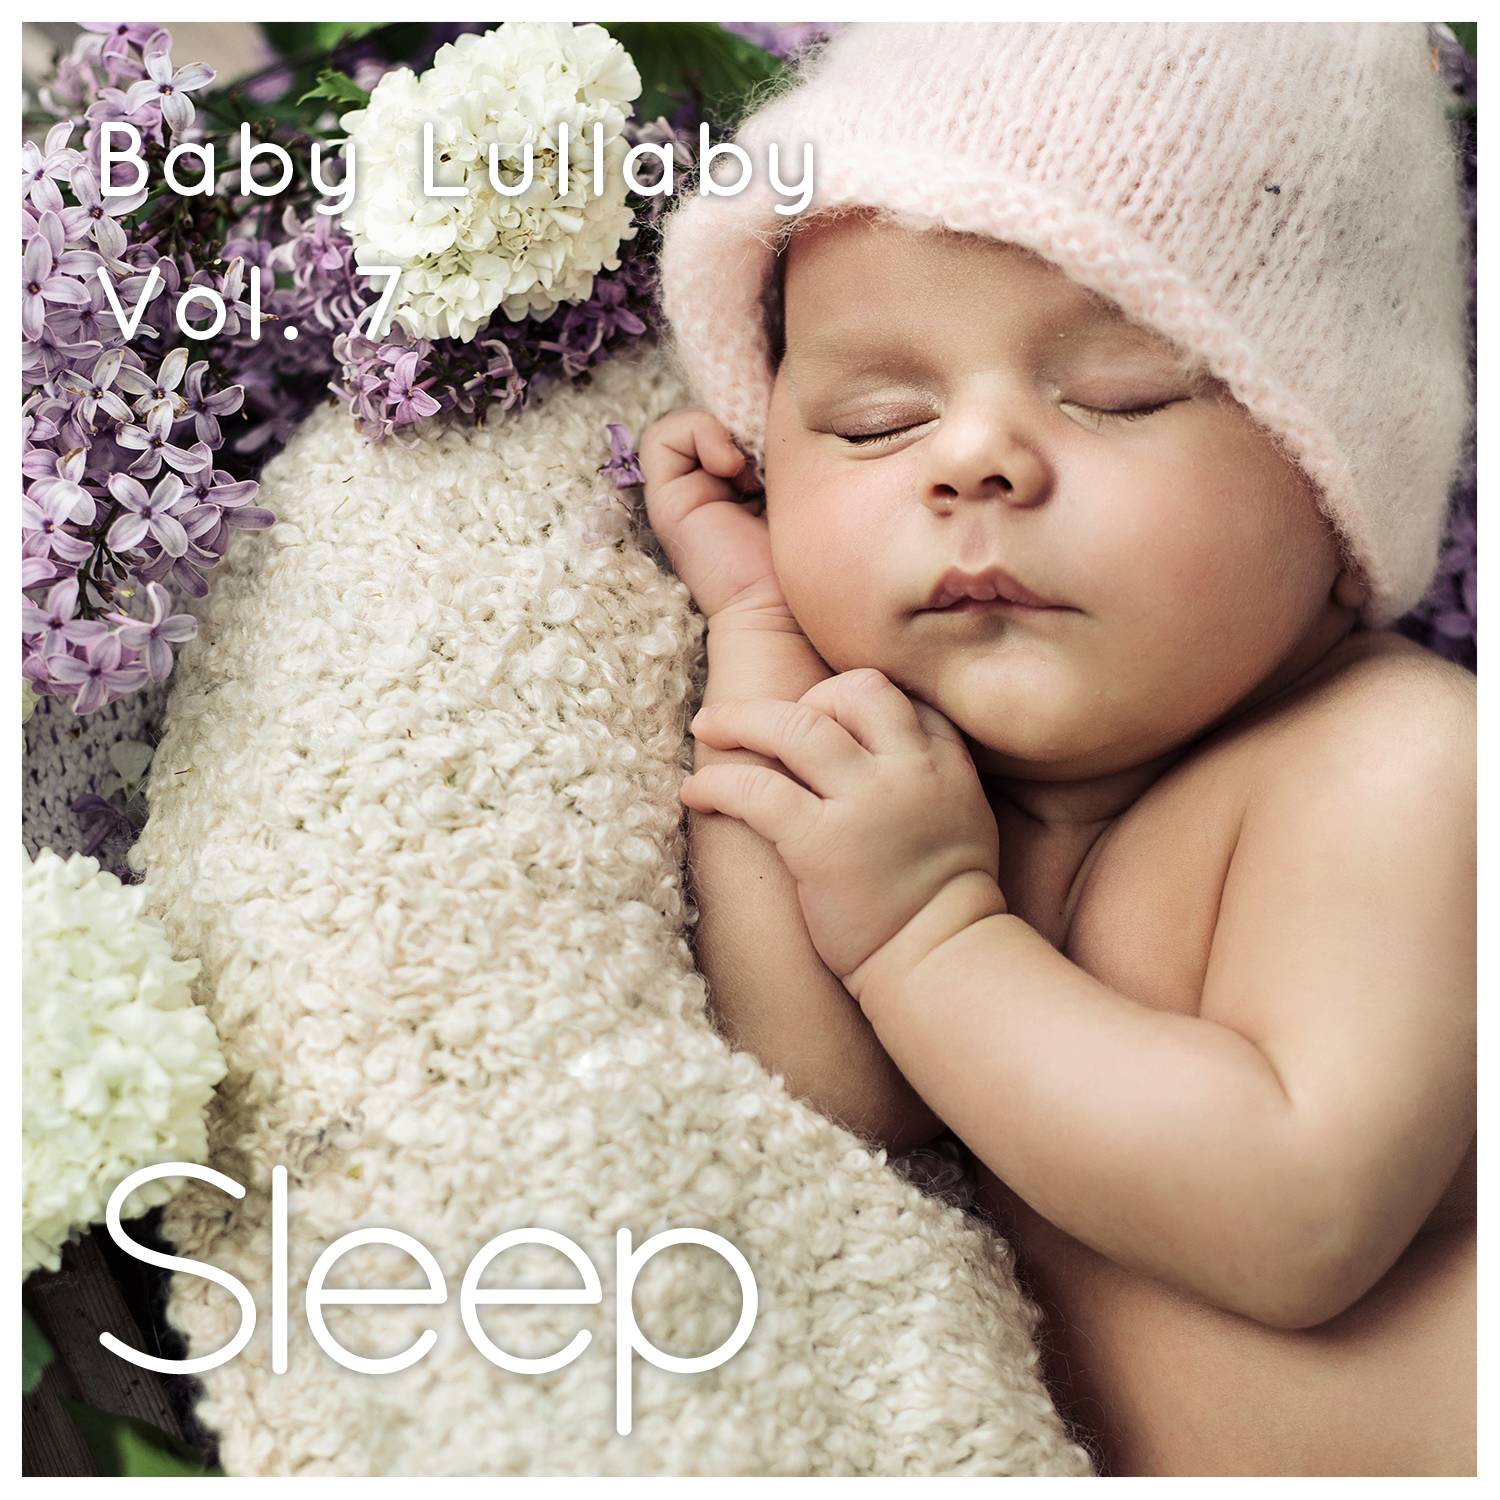 Baby Sleep Ambient Lullaby, Pt. 32